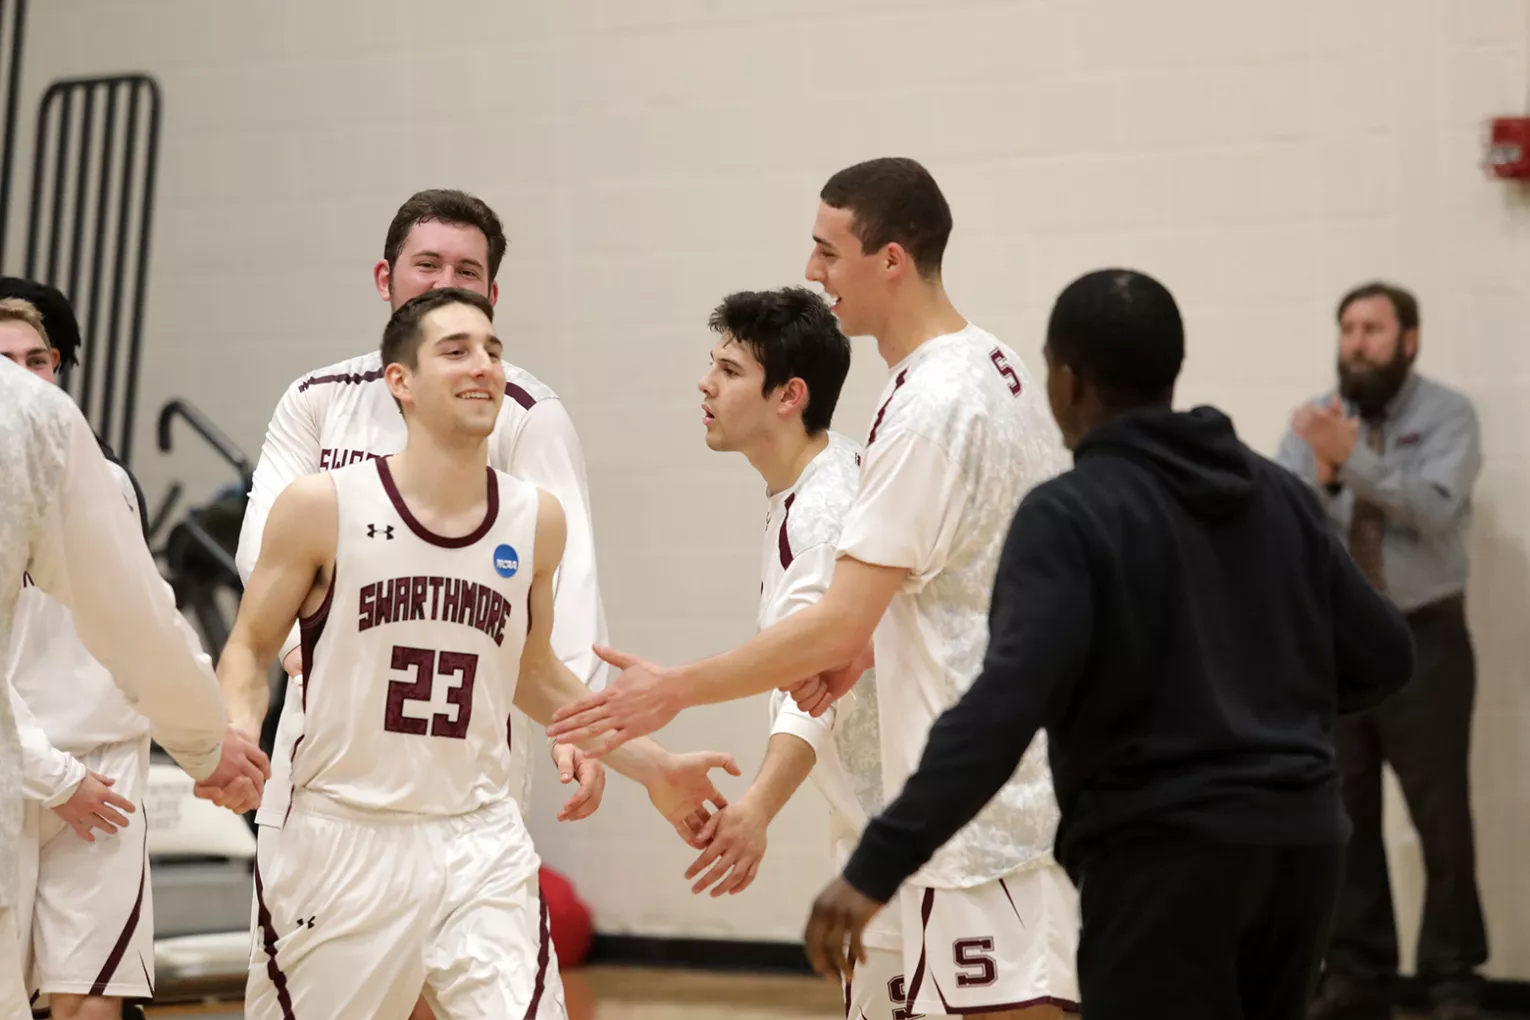 Student in white jersey receives high fives from teammates